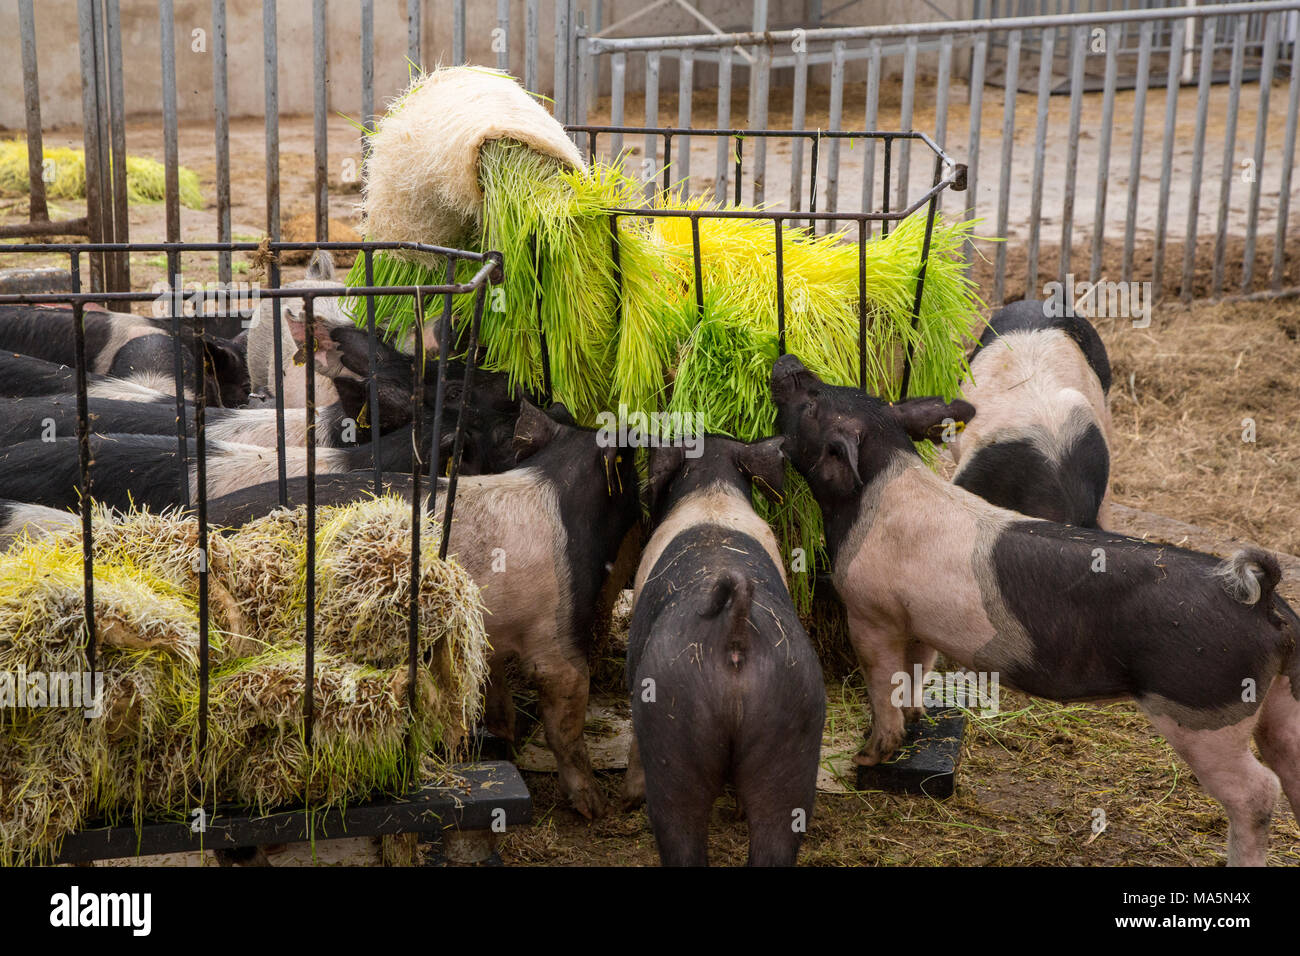 Hydroponic Agriculture.  Pigs Eating Barley Grown Hydroponically.   Dyersville, Iowa, USA. Stock Photo